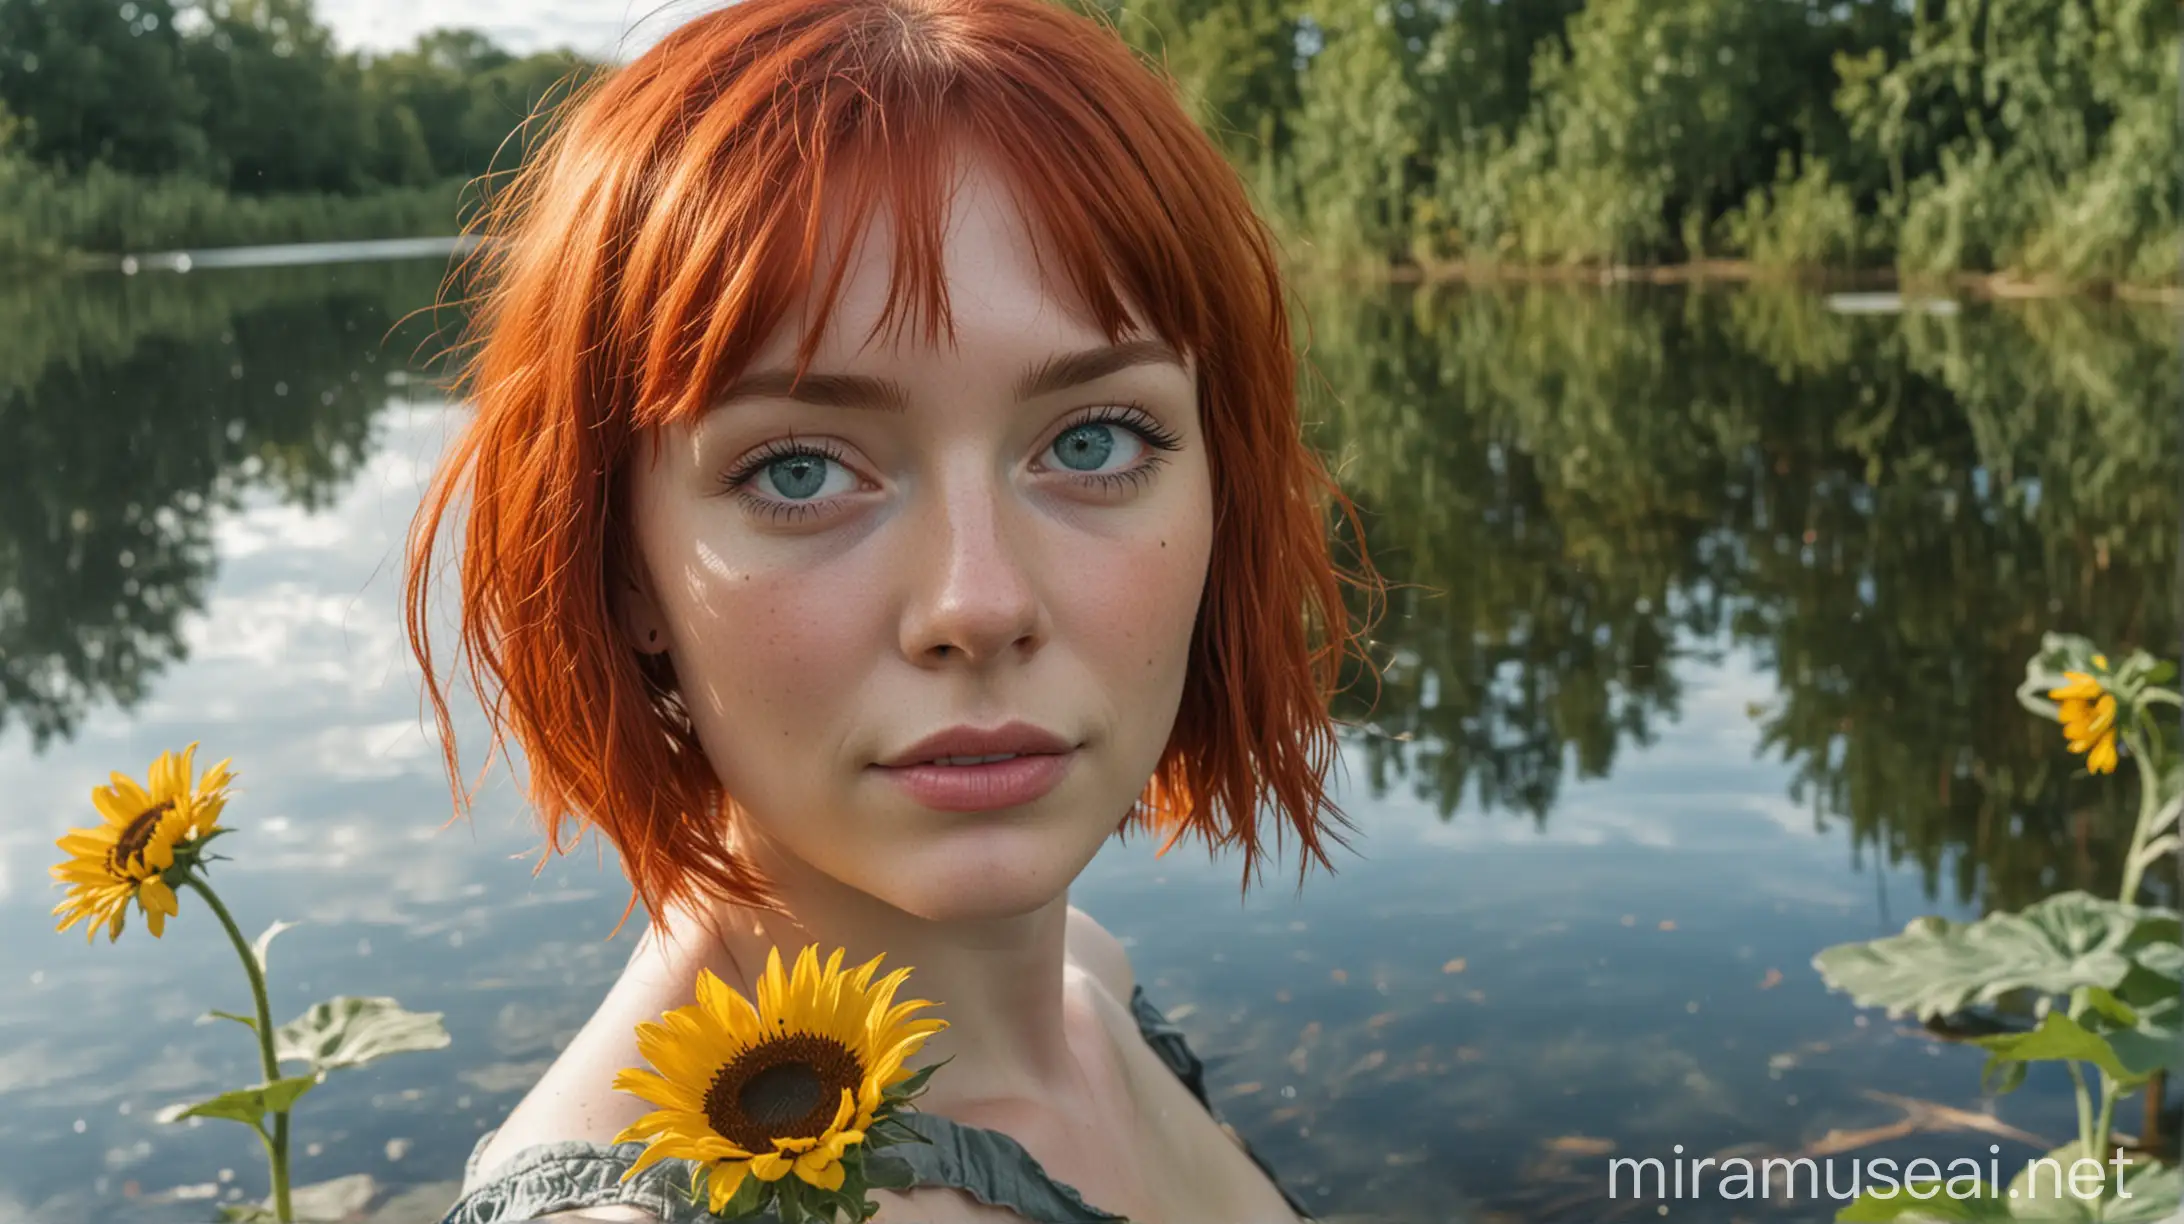 Van Gogh Style Portrait RedHaired Woman Holding Sunflower by the Lake